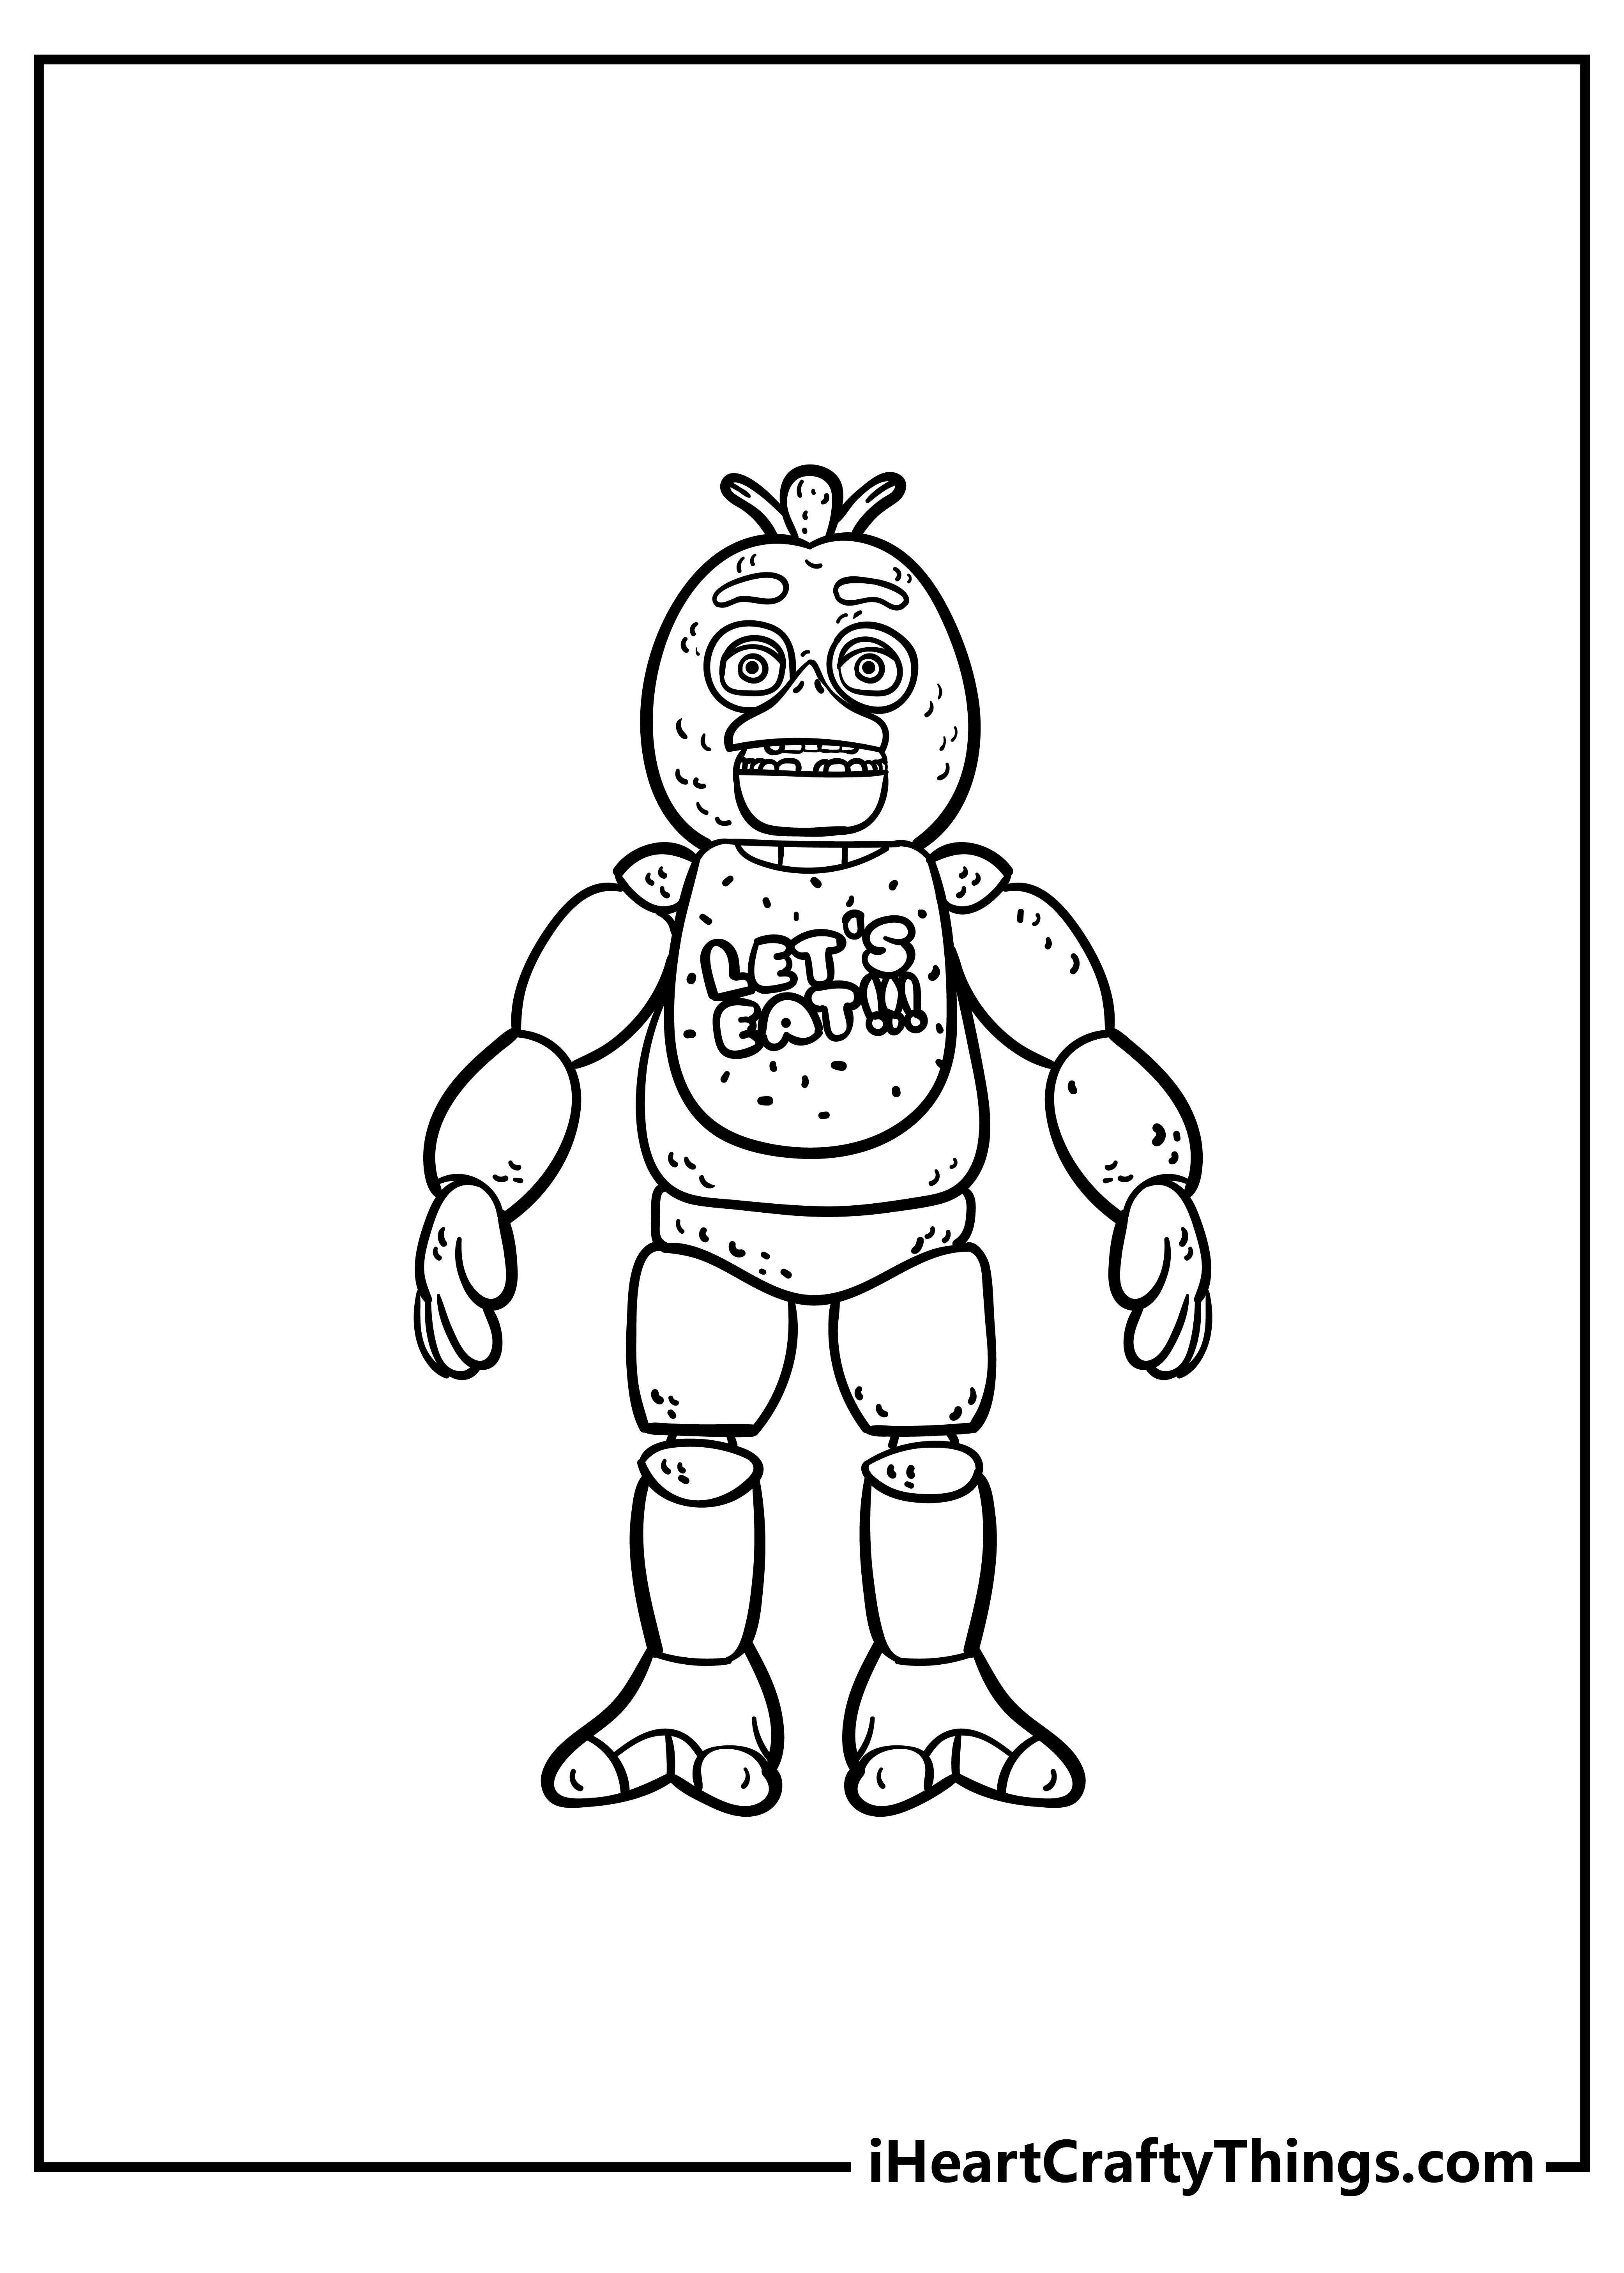 Five Nights At Freddy’s Coloring Book free printable